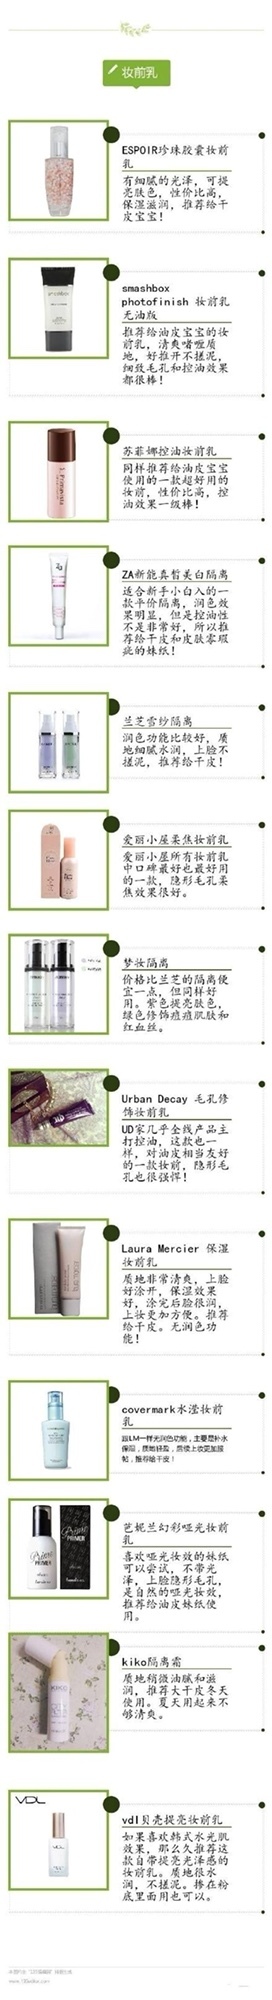 http://img1.superbuy.com/images/consult/2017/06/25/08b1c6aa1afee0a8854174c7ca6aa8a7.jpg?x-oss-process=image/resize,w_950